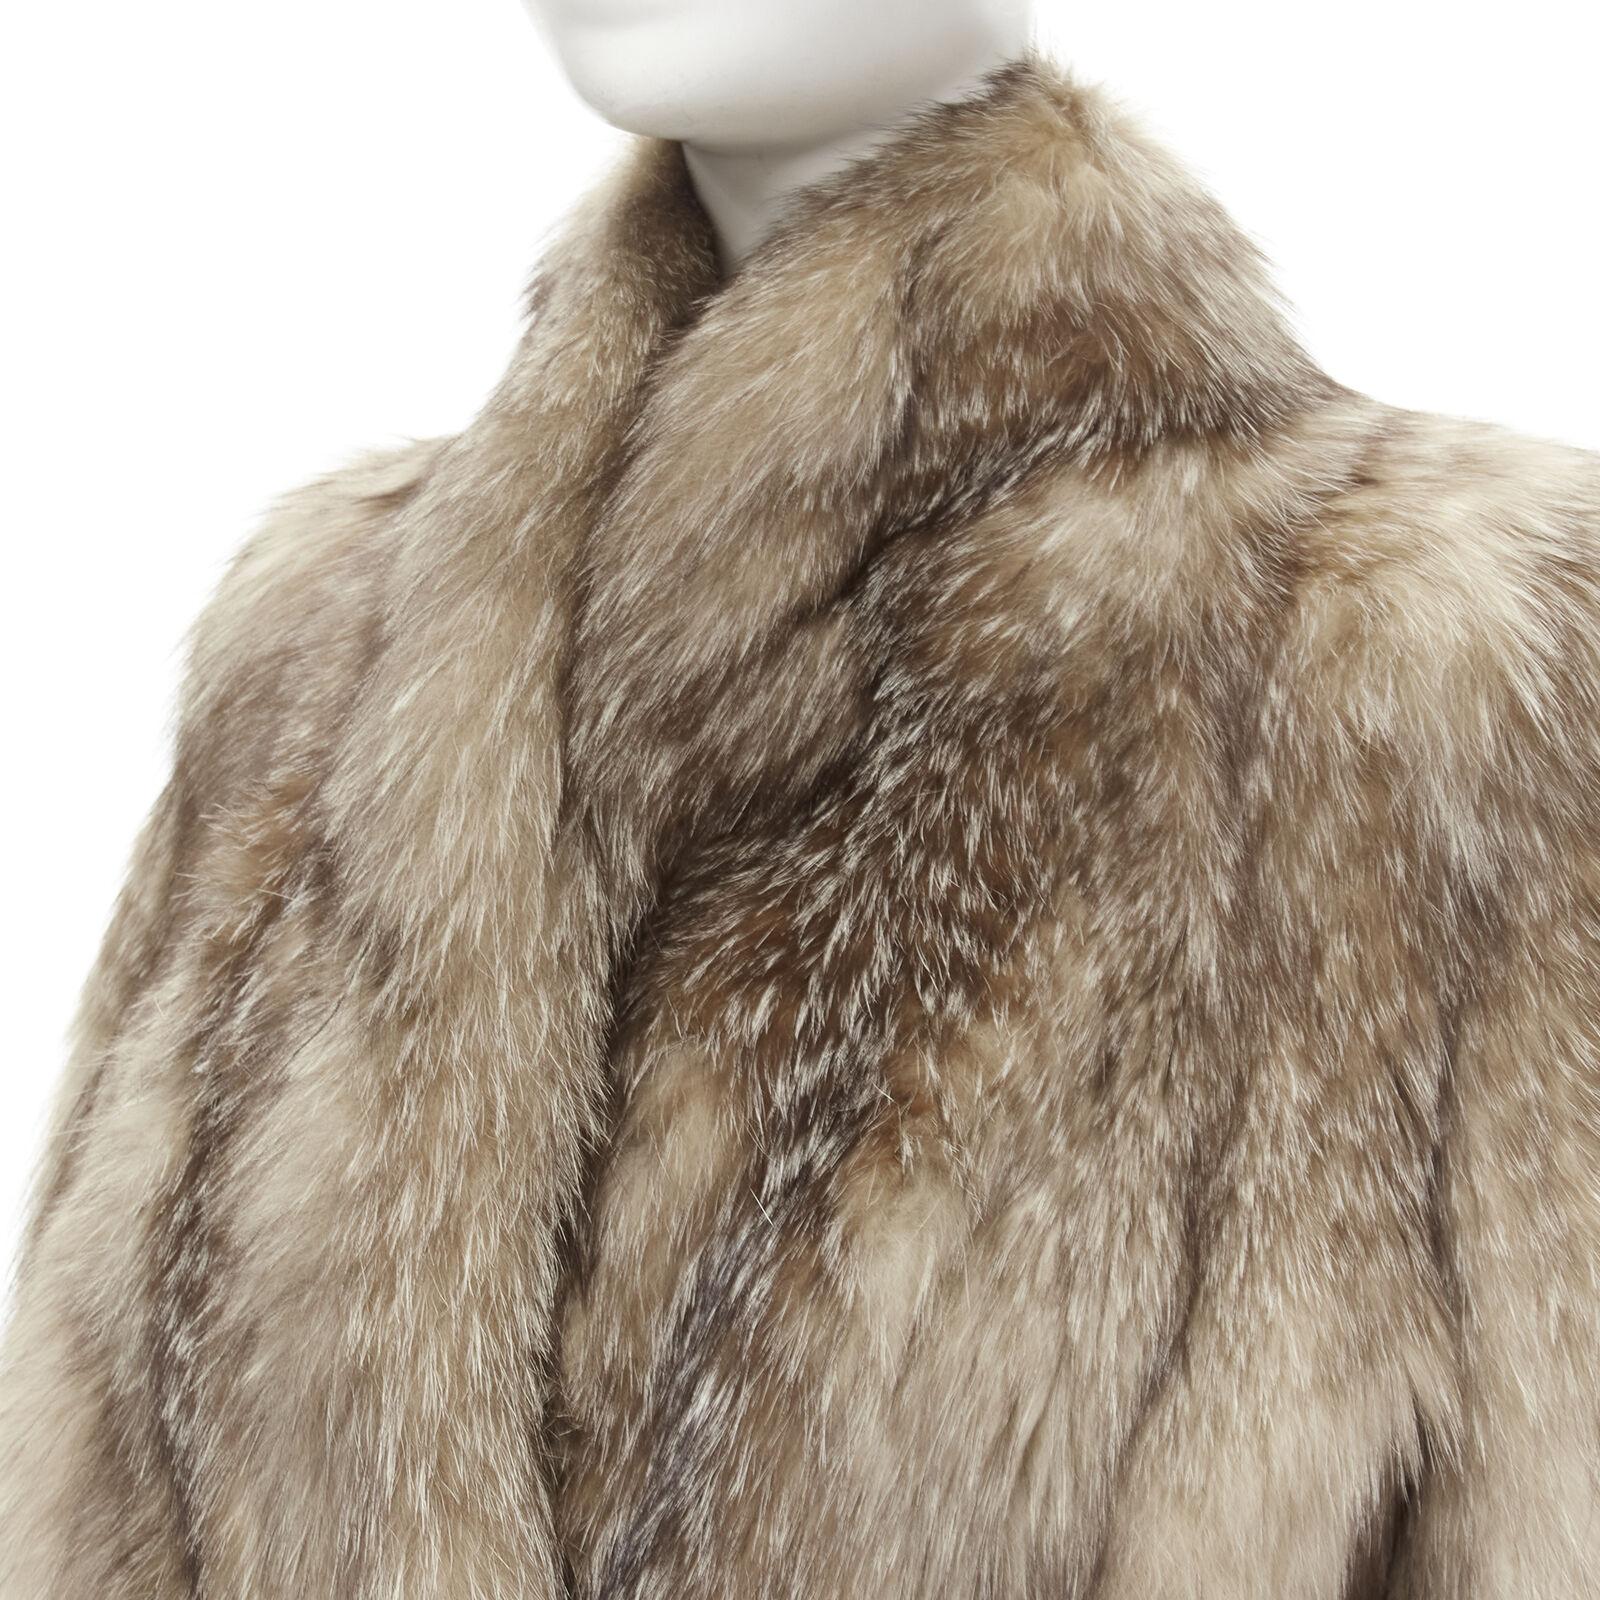 CORNELIUS brown fur shawl collar long sleeve hook eye fur jacket
Reference: JECW/A00003
Brand: Cornelius
Material: Fur
Color: Brown
Closure: Hook & Eye
Lining: Fabric

CONDITION:
Condition: Excellent, this item was pre-owned and is in excellent